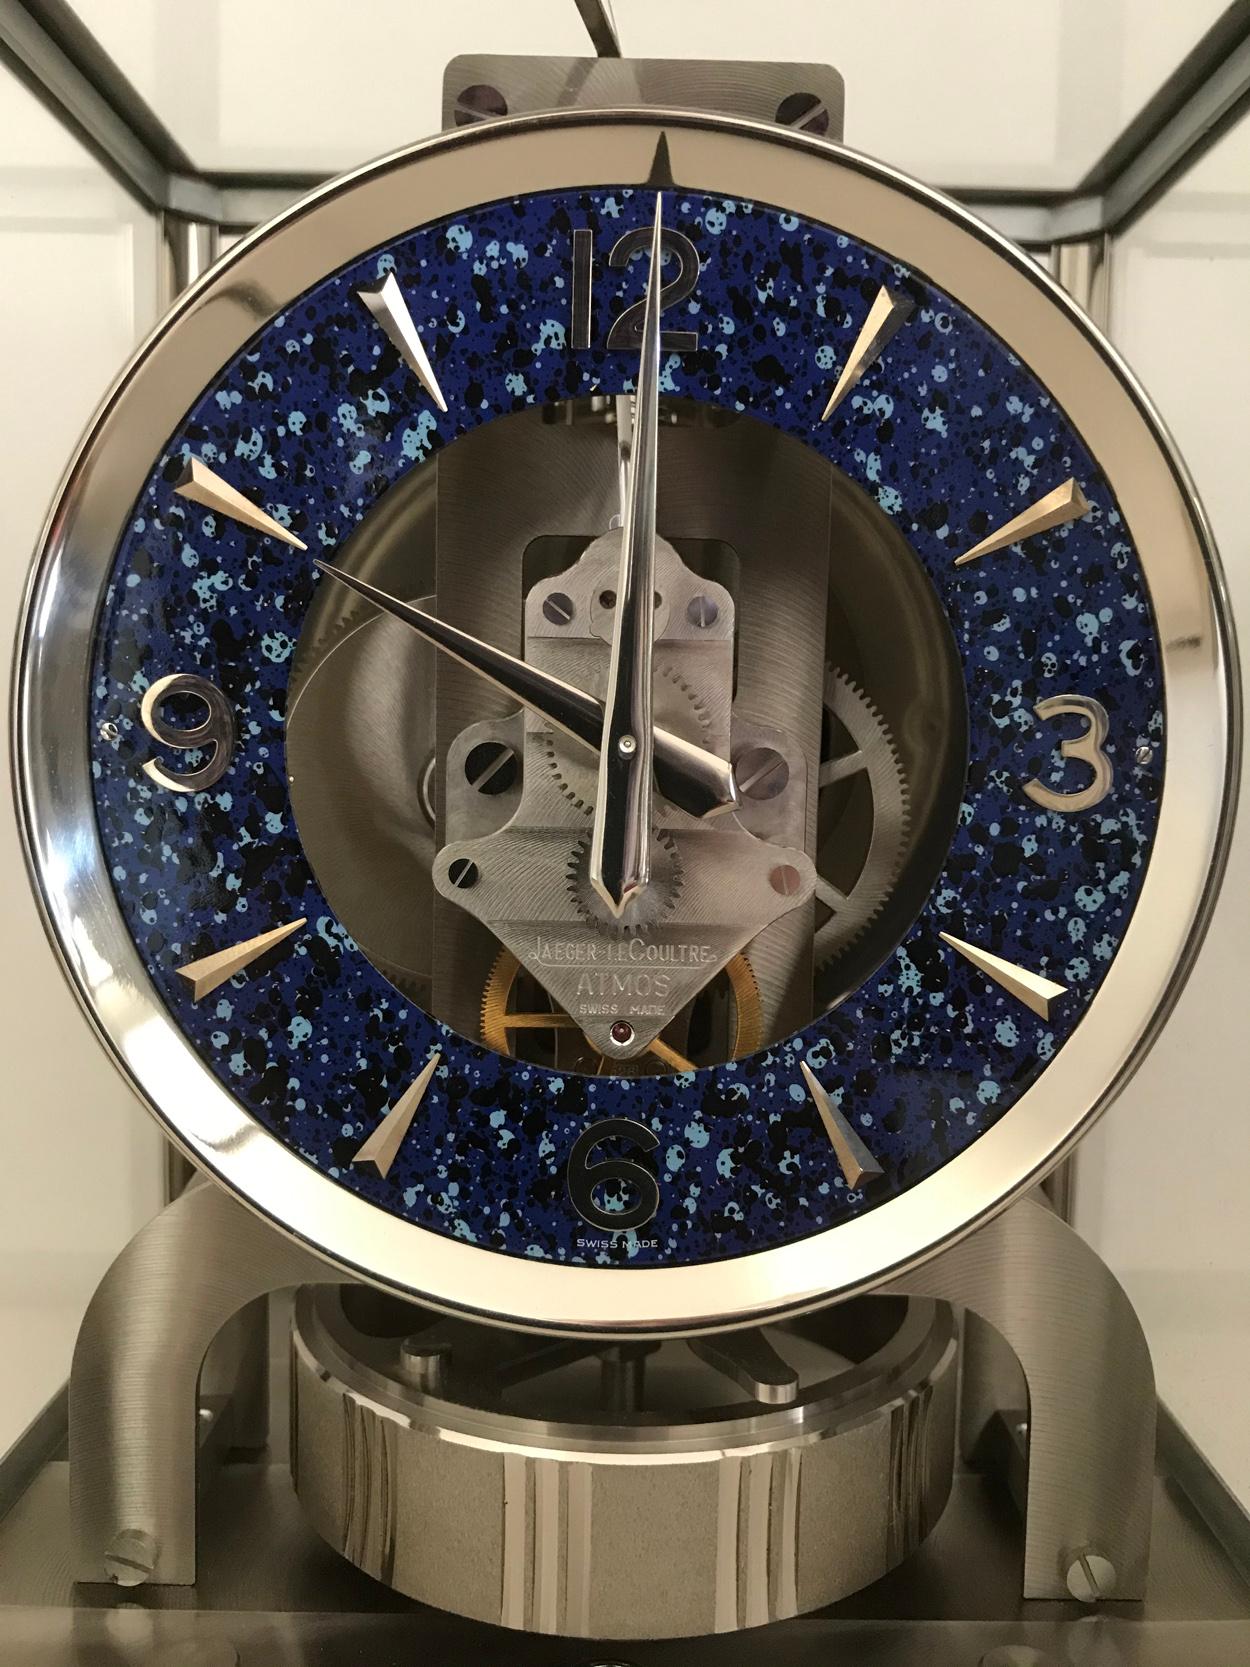 A rare Swiss Atmos Royale clock, circa 1974 the rhodium plated framed five glass body exposing the internal mechanism within, centered by a striking lapis style dial, with perpetual motion.

Serial number: 426914

Includes the original manual.